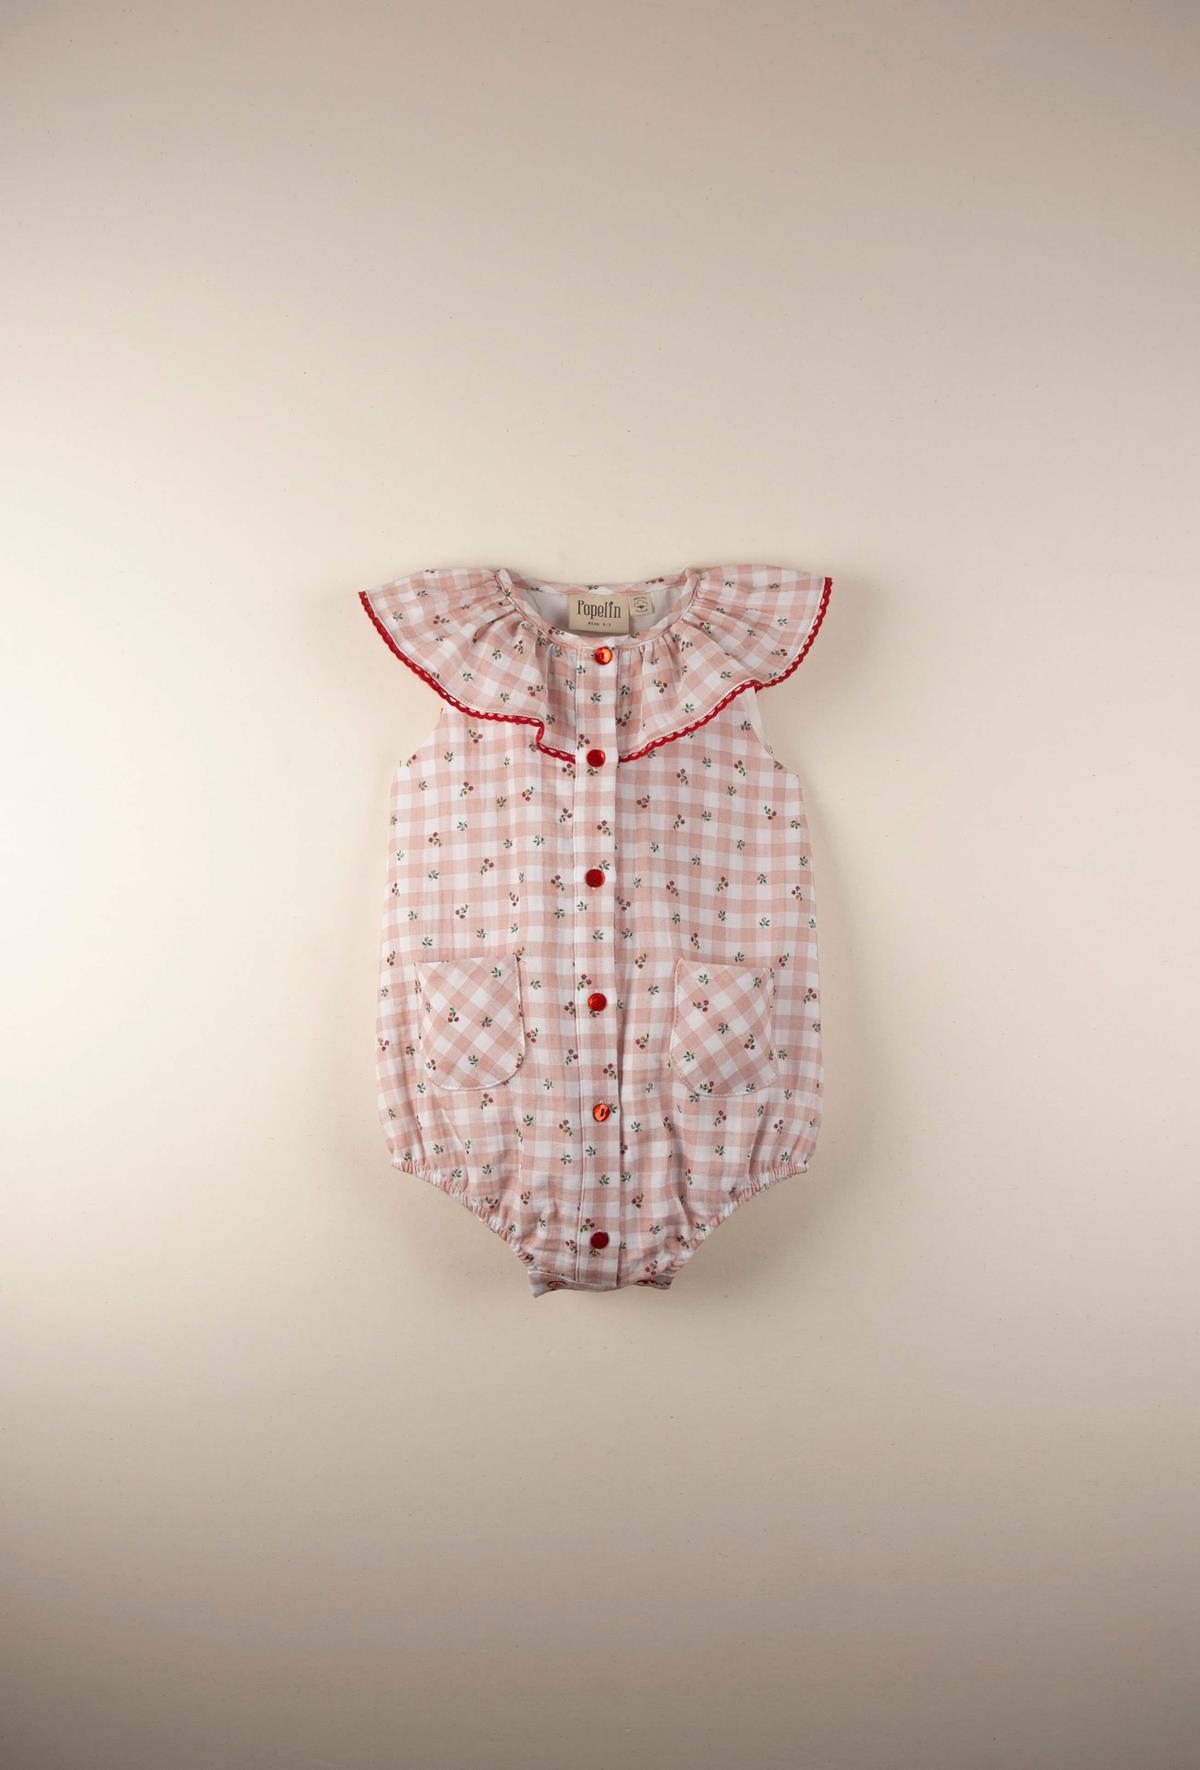 Mod.8.3 Gingham and floral organic romper suit with frilled collar | SS22 Mod.8.3 Gingham and floral organic romper suit with frilled collar | 1